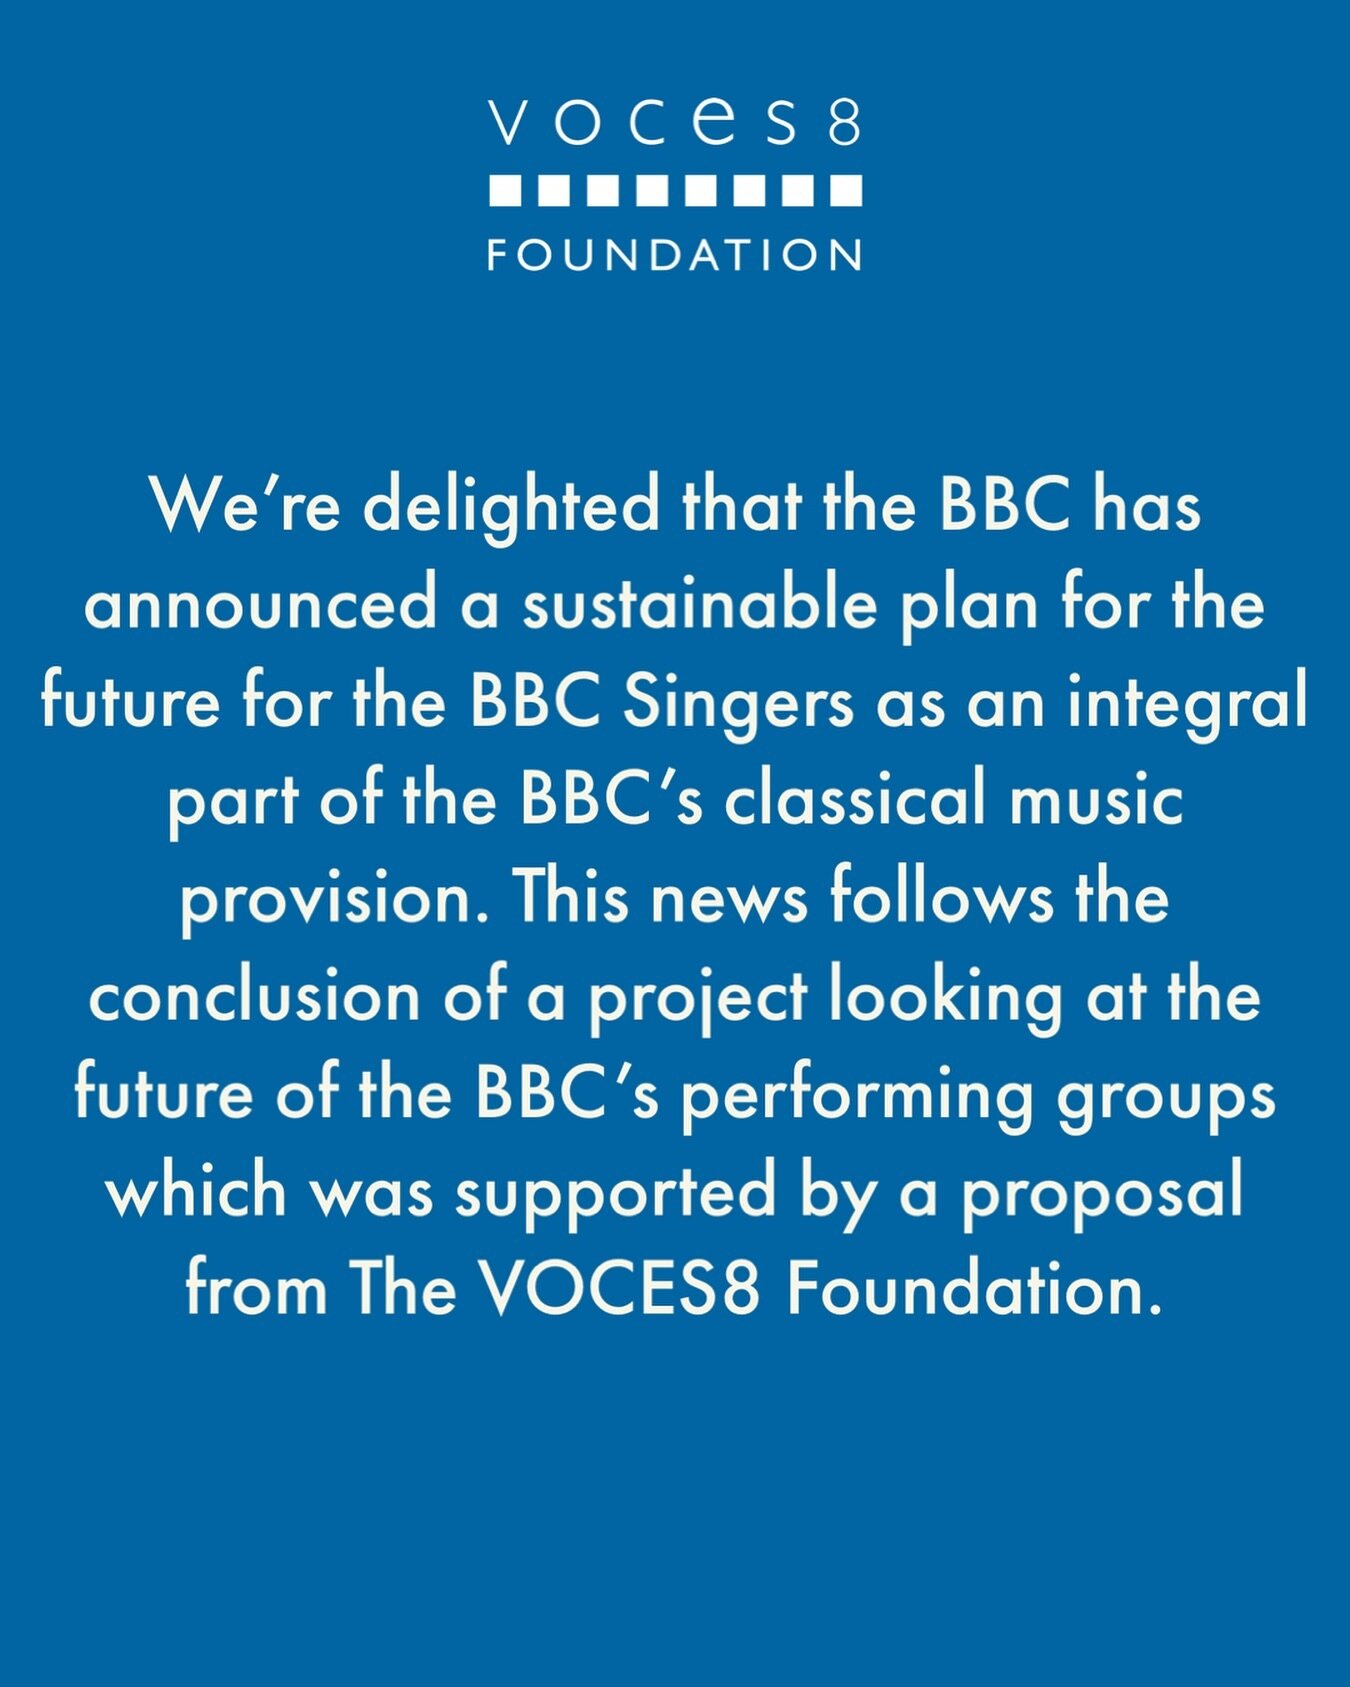 To read the full statement, visit the @voces8foundation website, link in our bio.